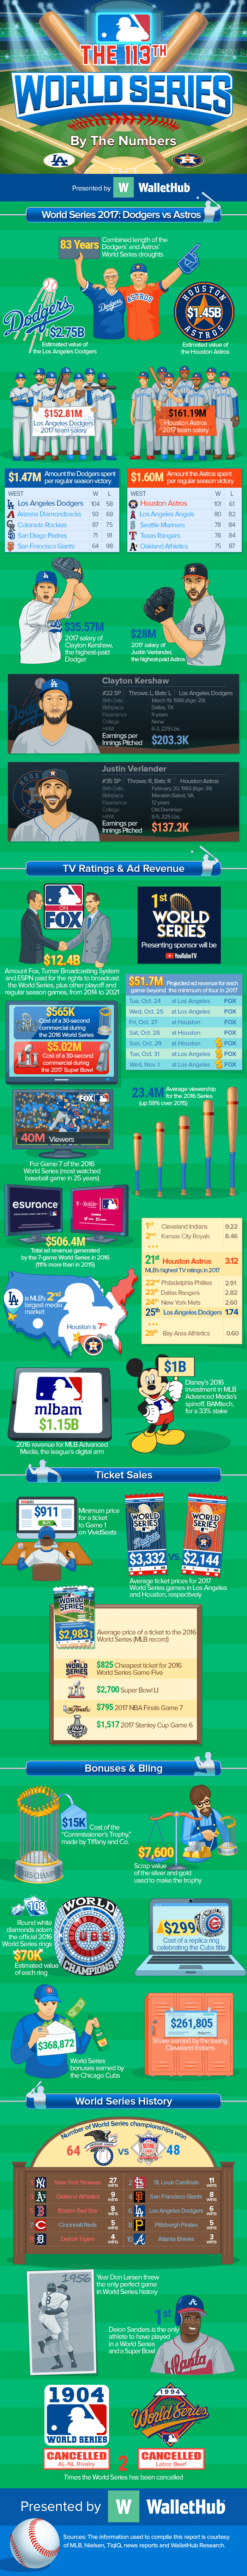 The 113th World Series by the Numbers